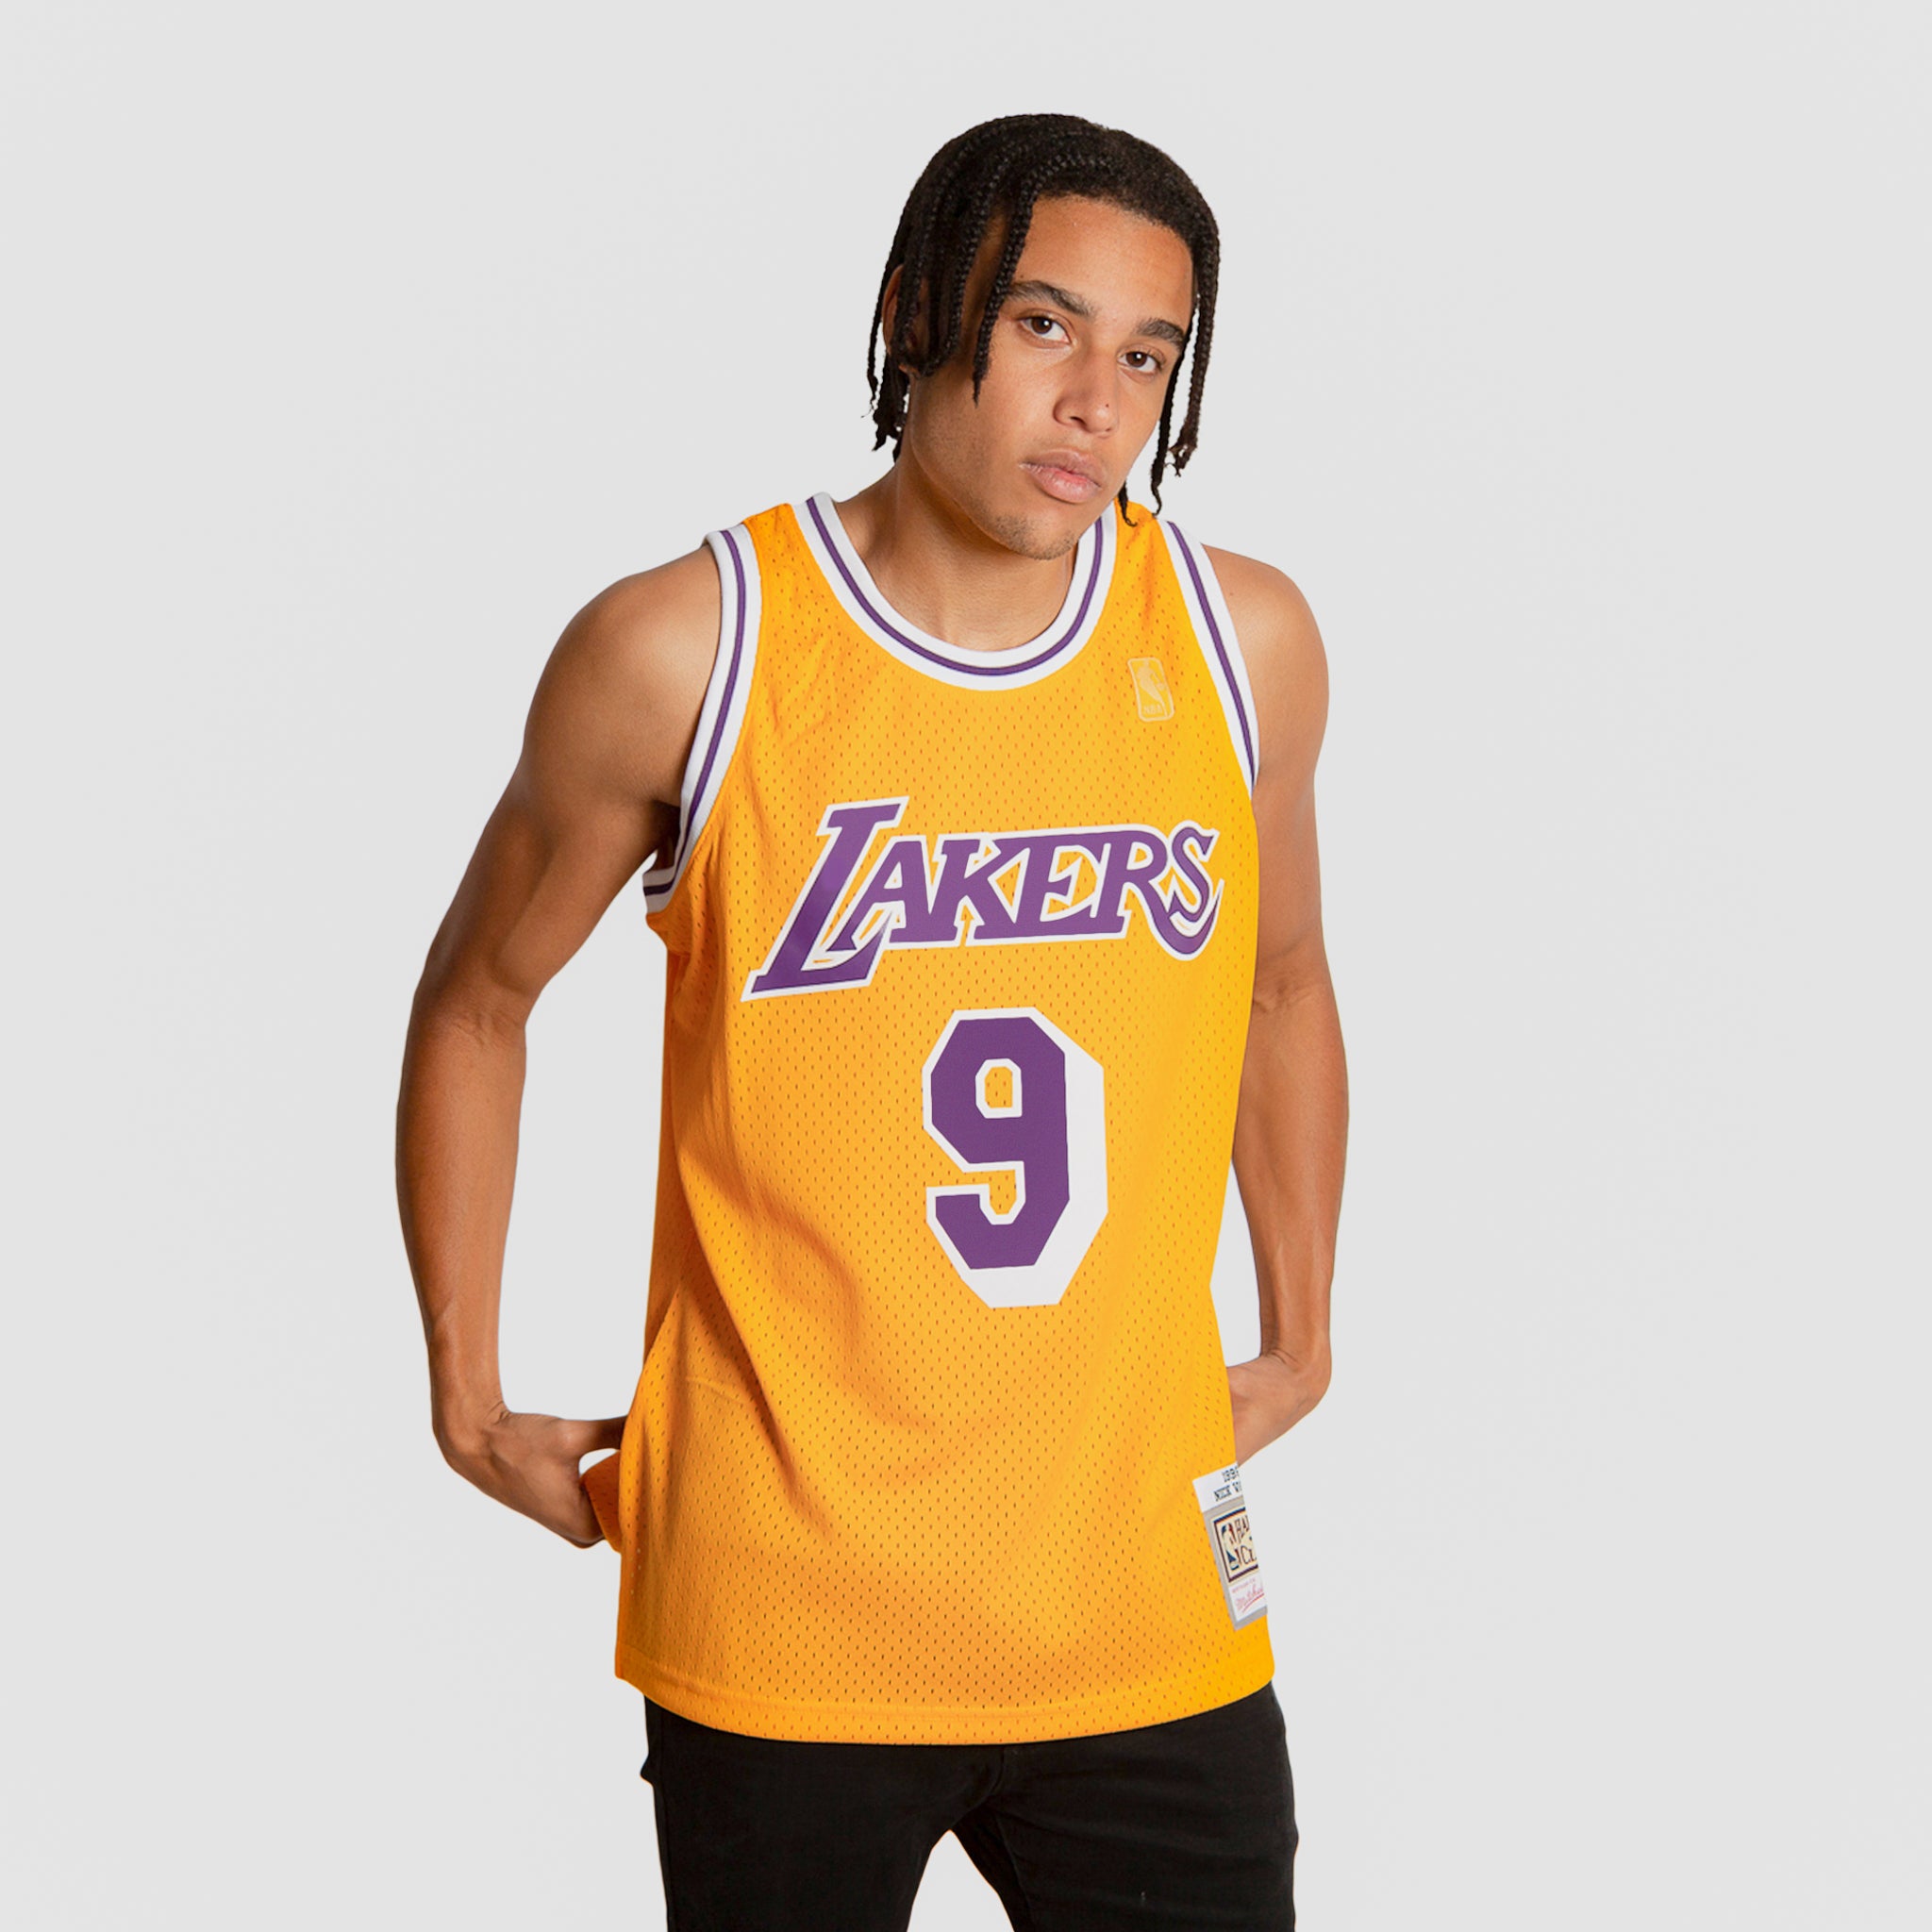 Lebron James Los Angeles Lakers Jersey yellow – Classic Authentics